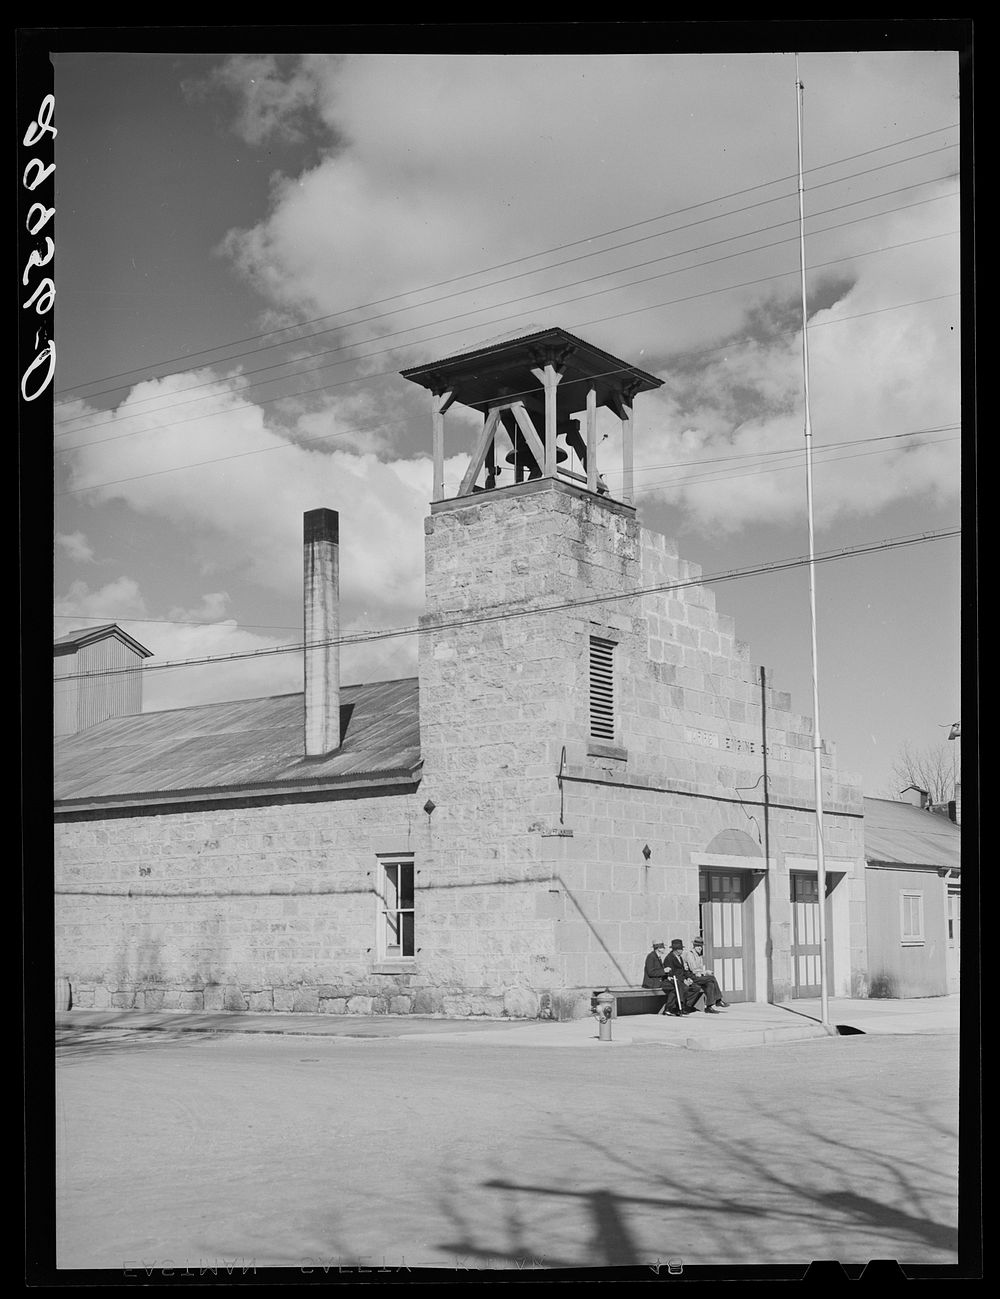 Firehouse. Carson City, Nevada. Sourced from the Library of Congress.